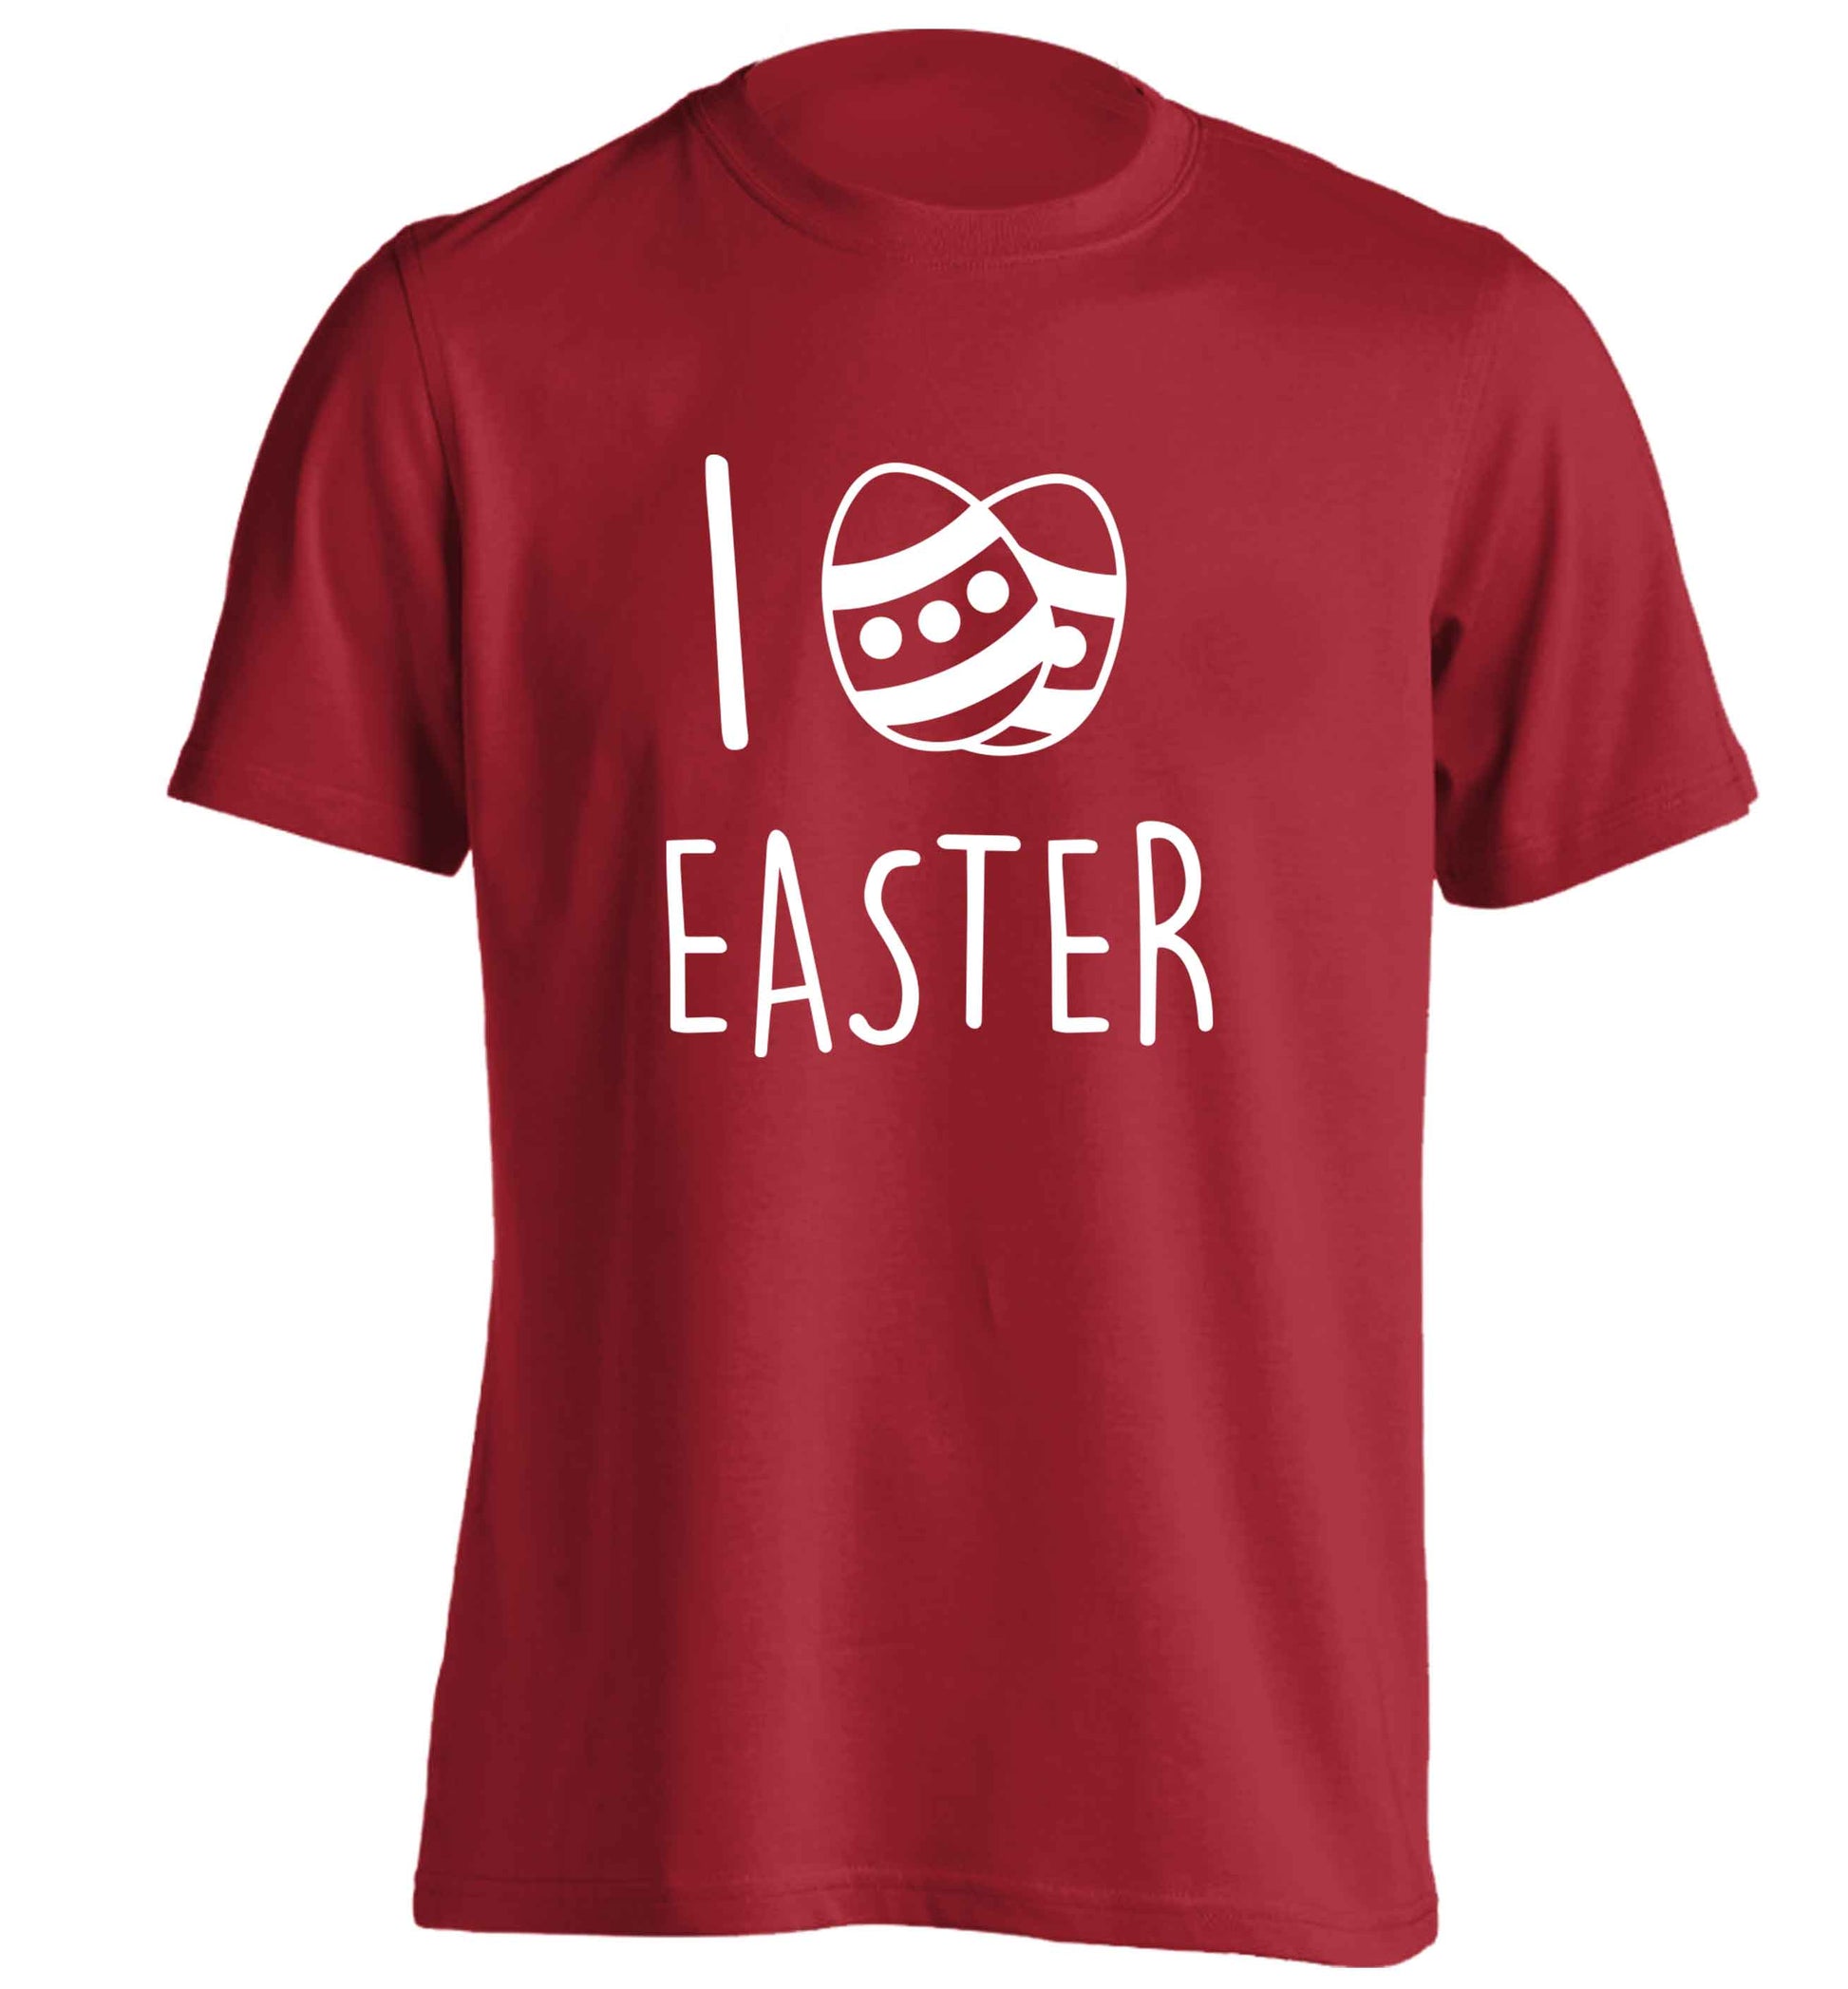 I love Easter adults unisex red Tshirt 2XL